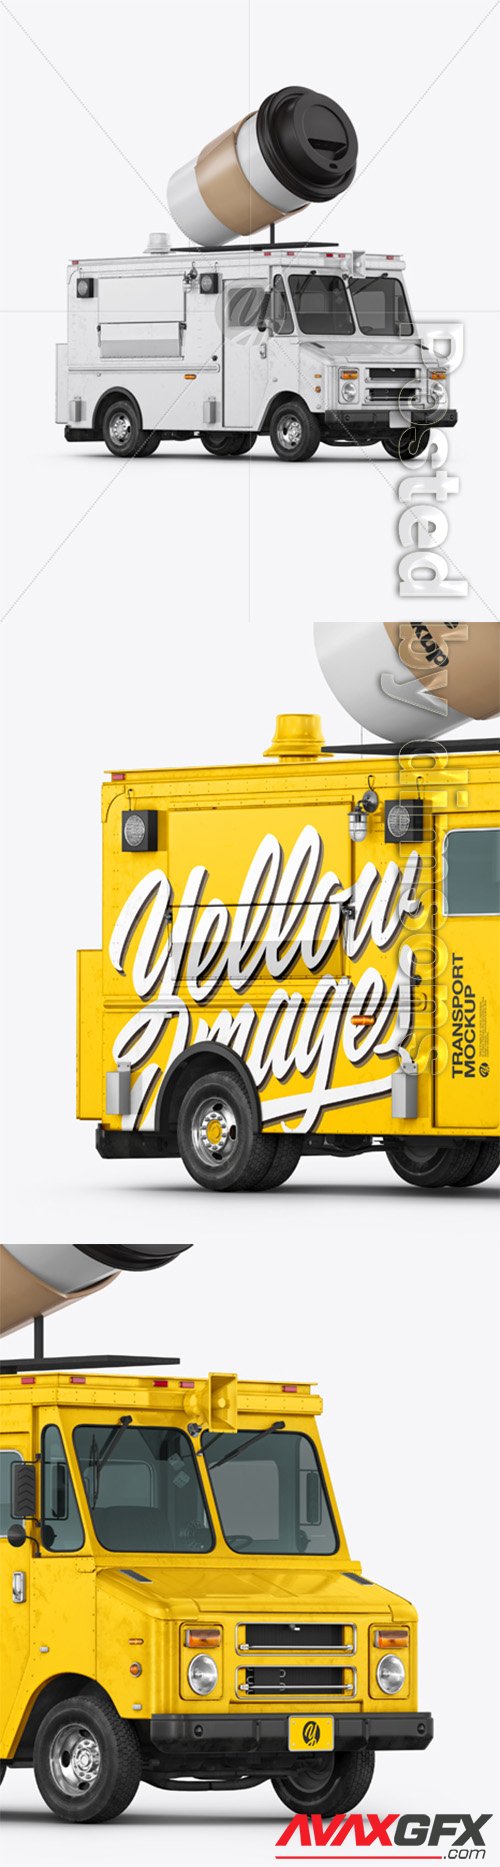 Foodtruck with Coffee Cup Mockup - Half Side View 36189